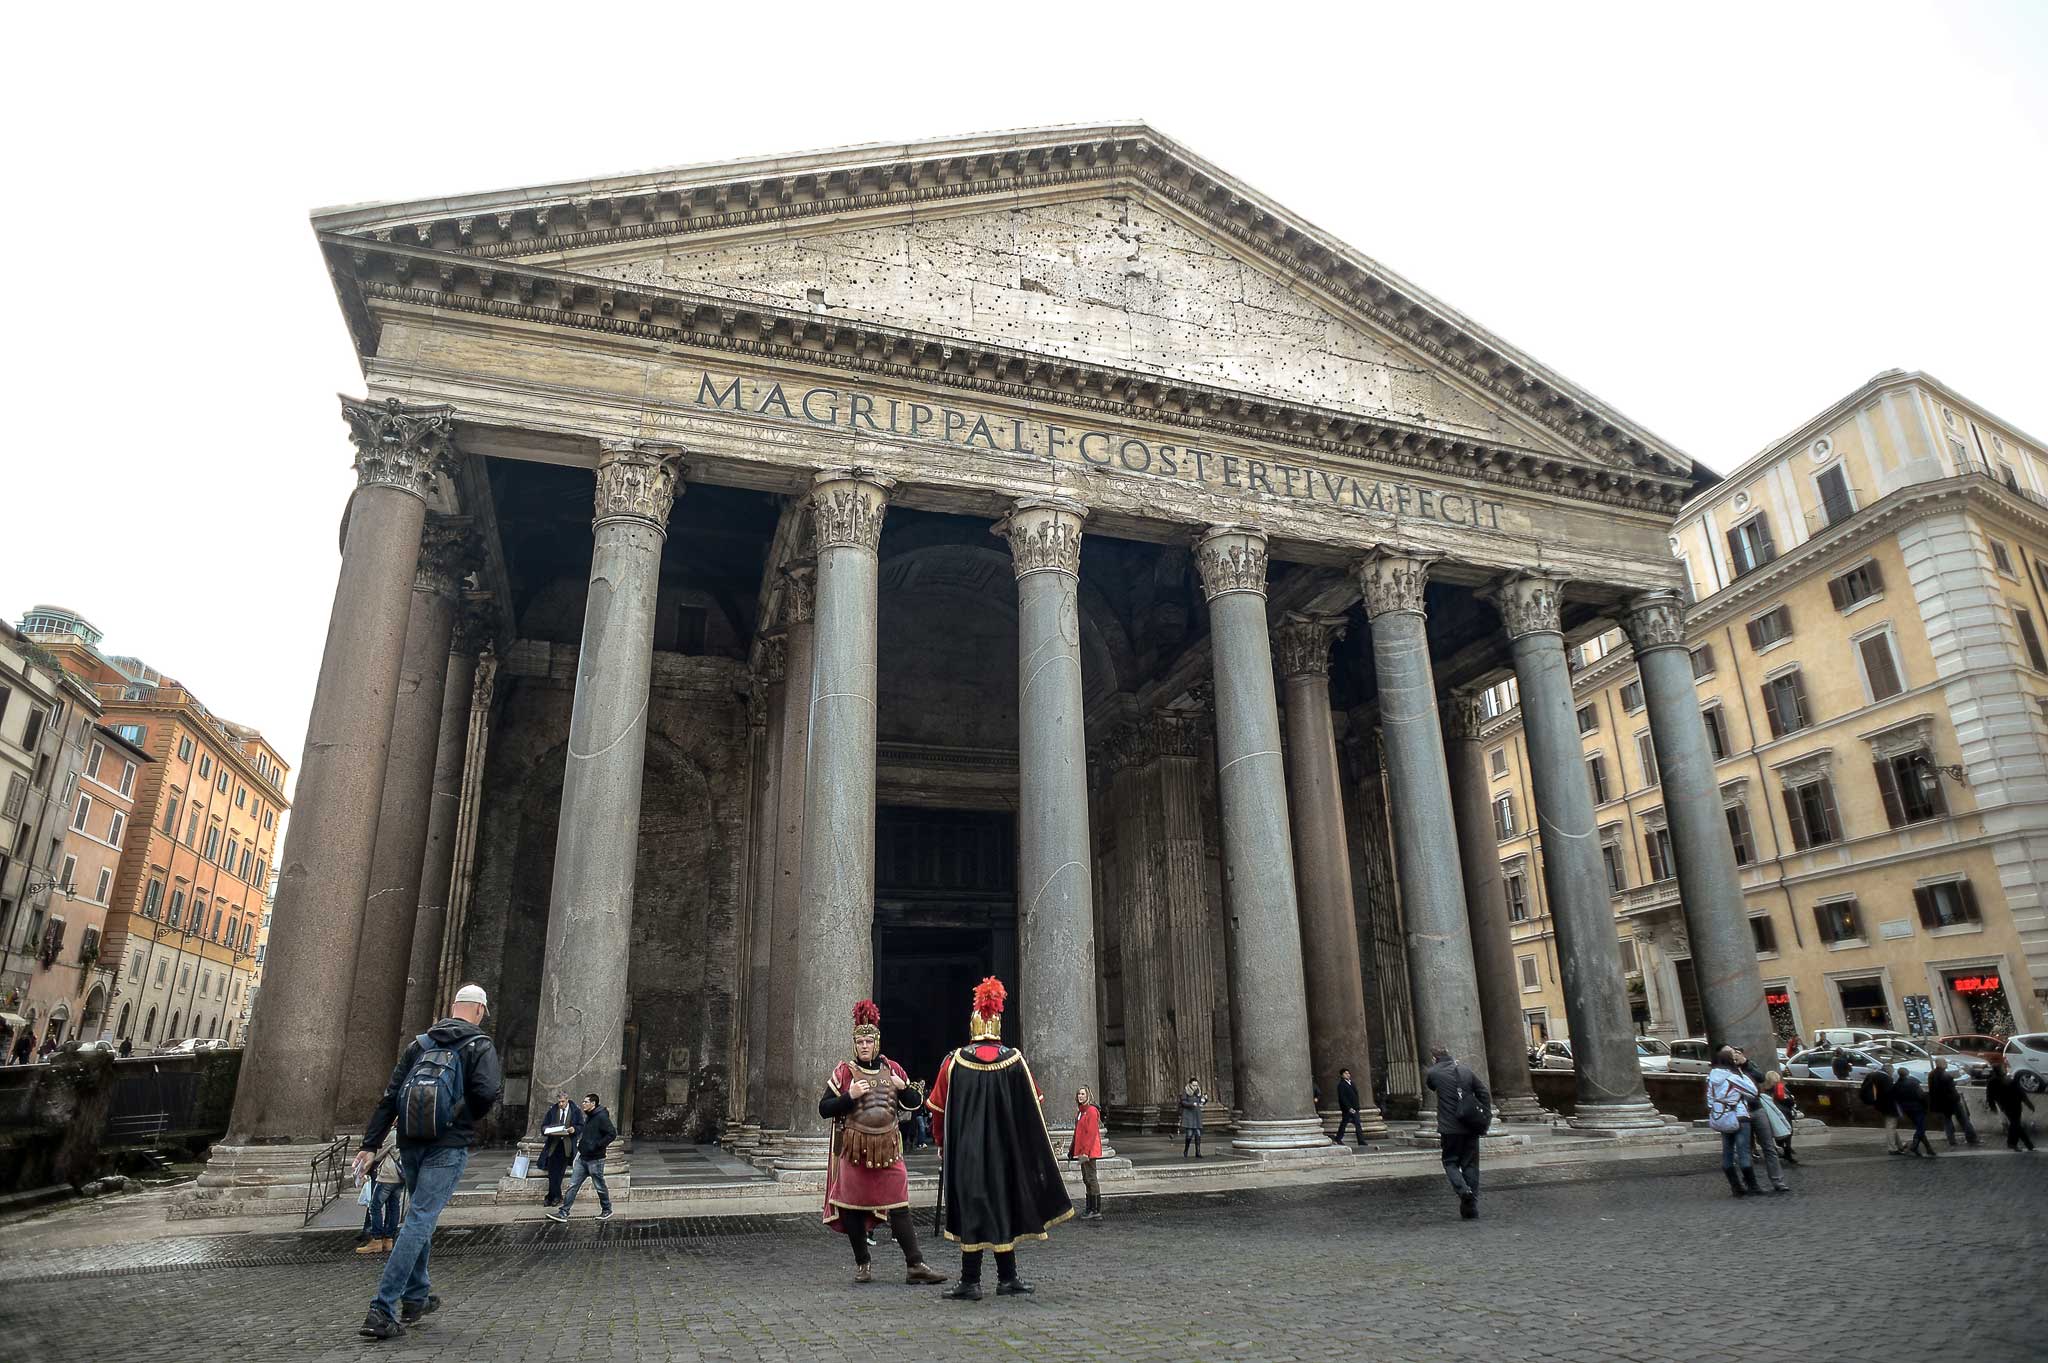 Trips to the Pantheon in Rome now come with a side of quarantine